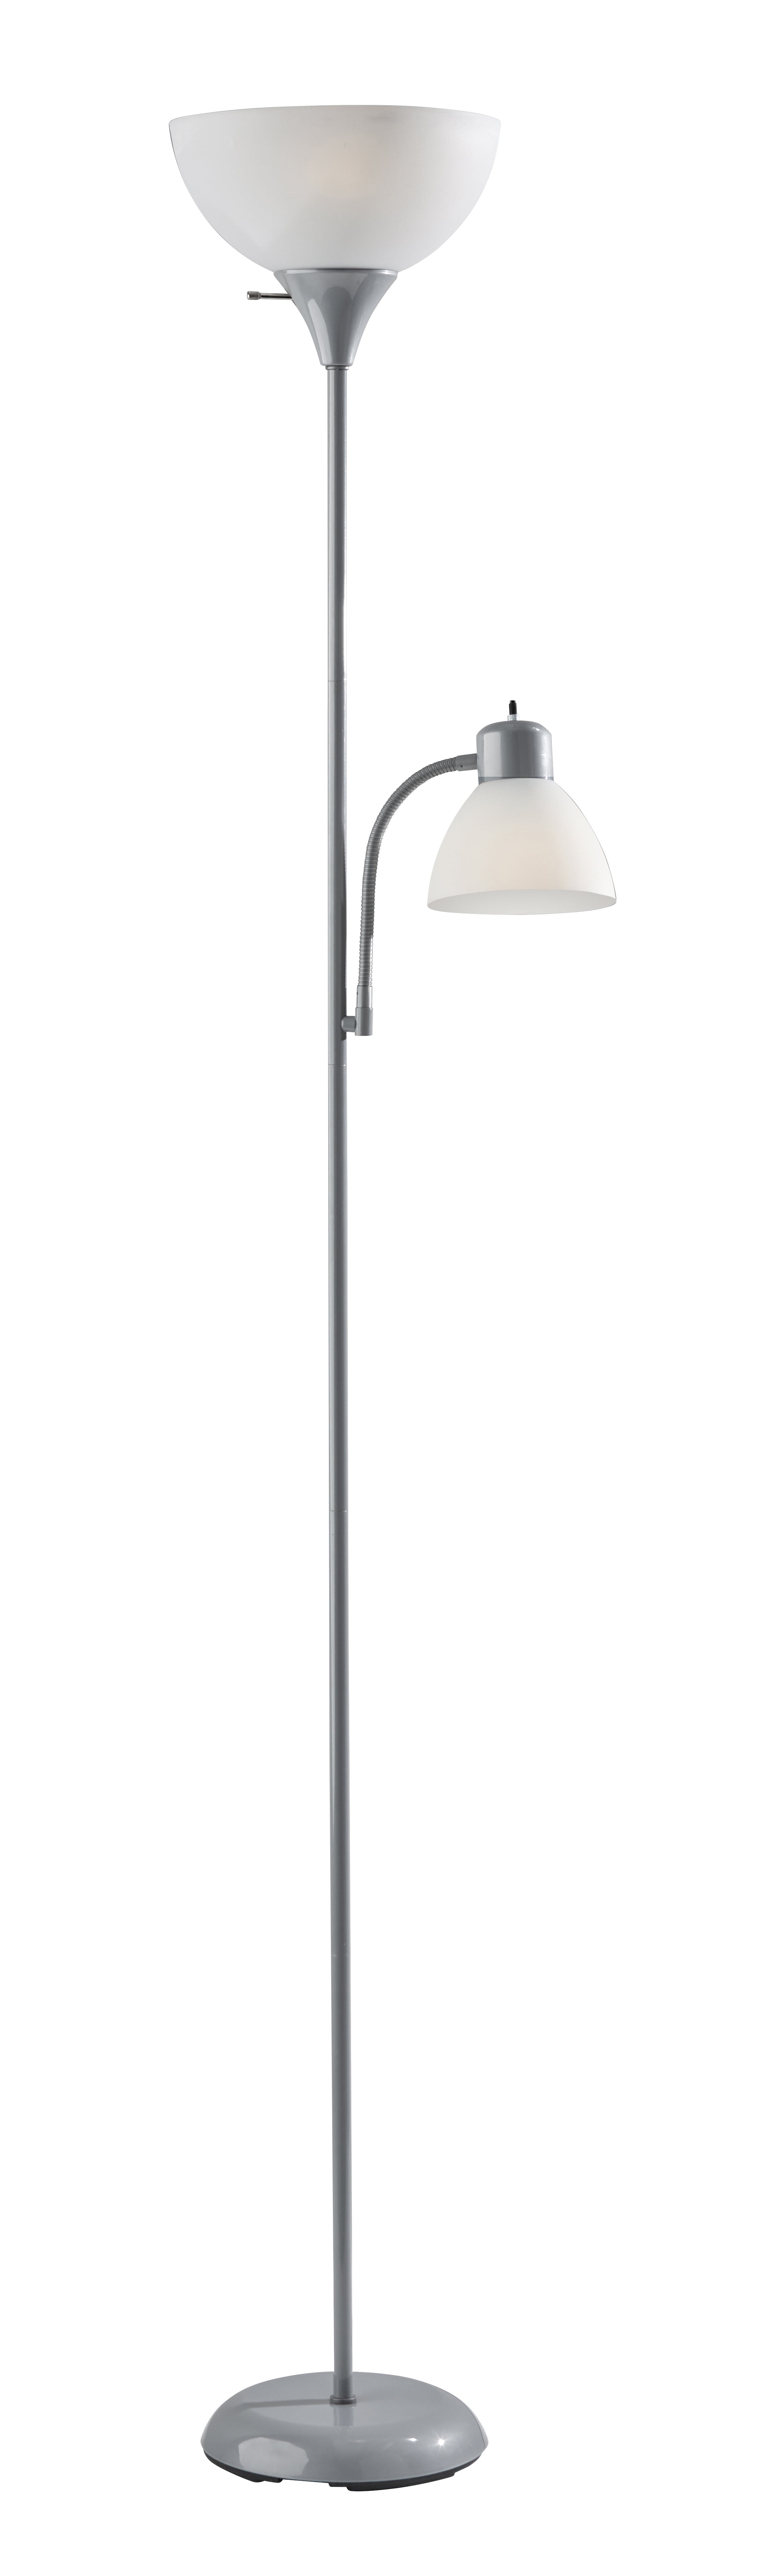 Mainstays 72'' Combo Floor Lamp with Adjustable Reading Lamp, Silver, Metal Material